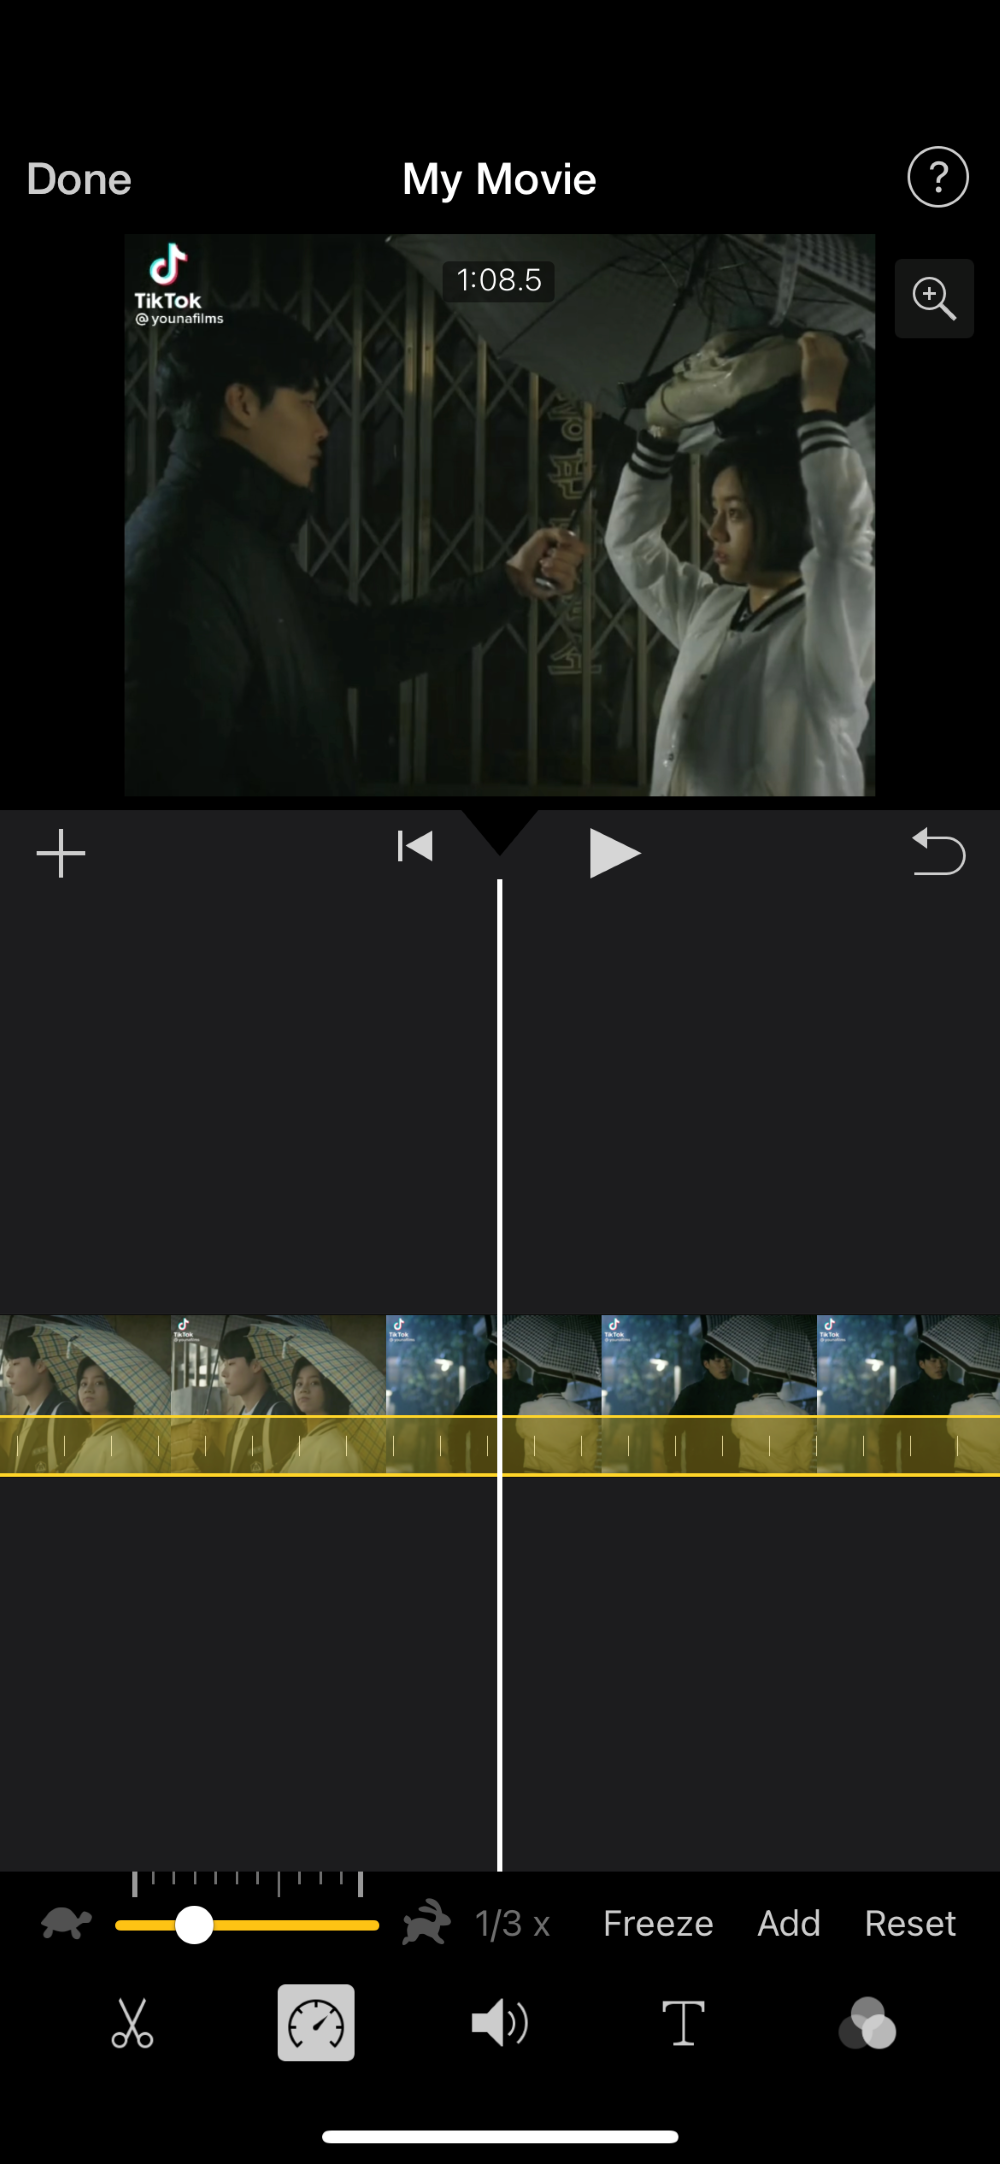 Slowing down the playback speed of the video